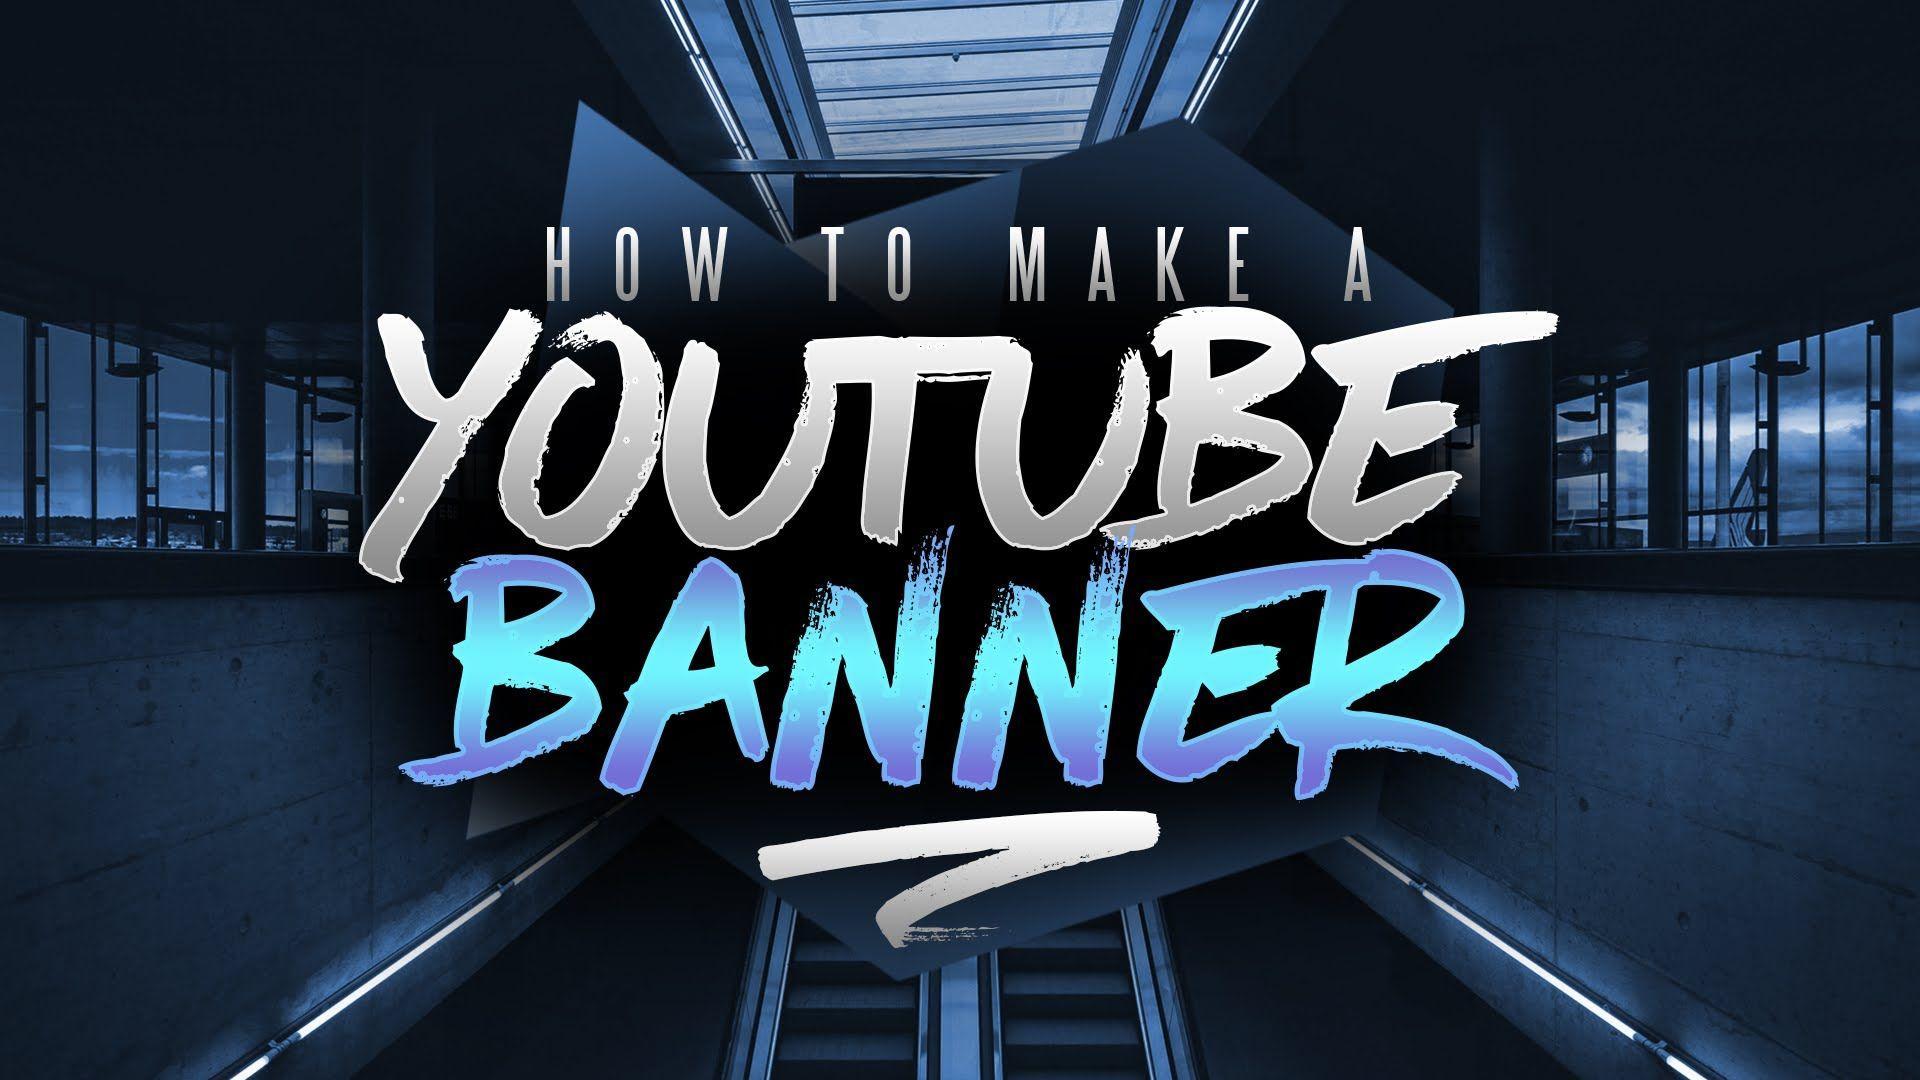 How To Make A YouTube Banner In Photohop! Channel Art Tutorial (2016 2017)